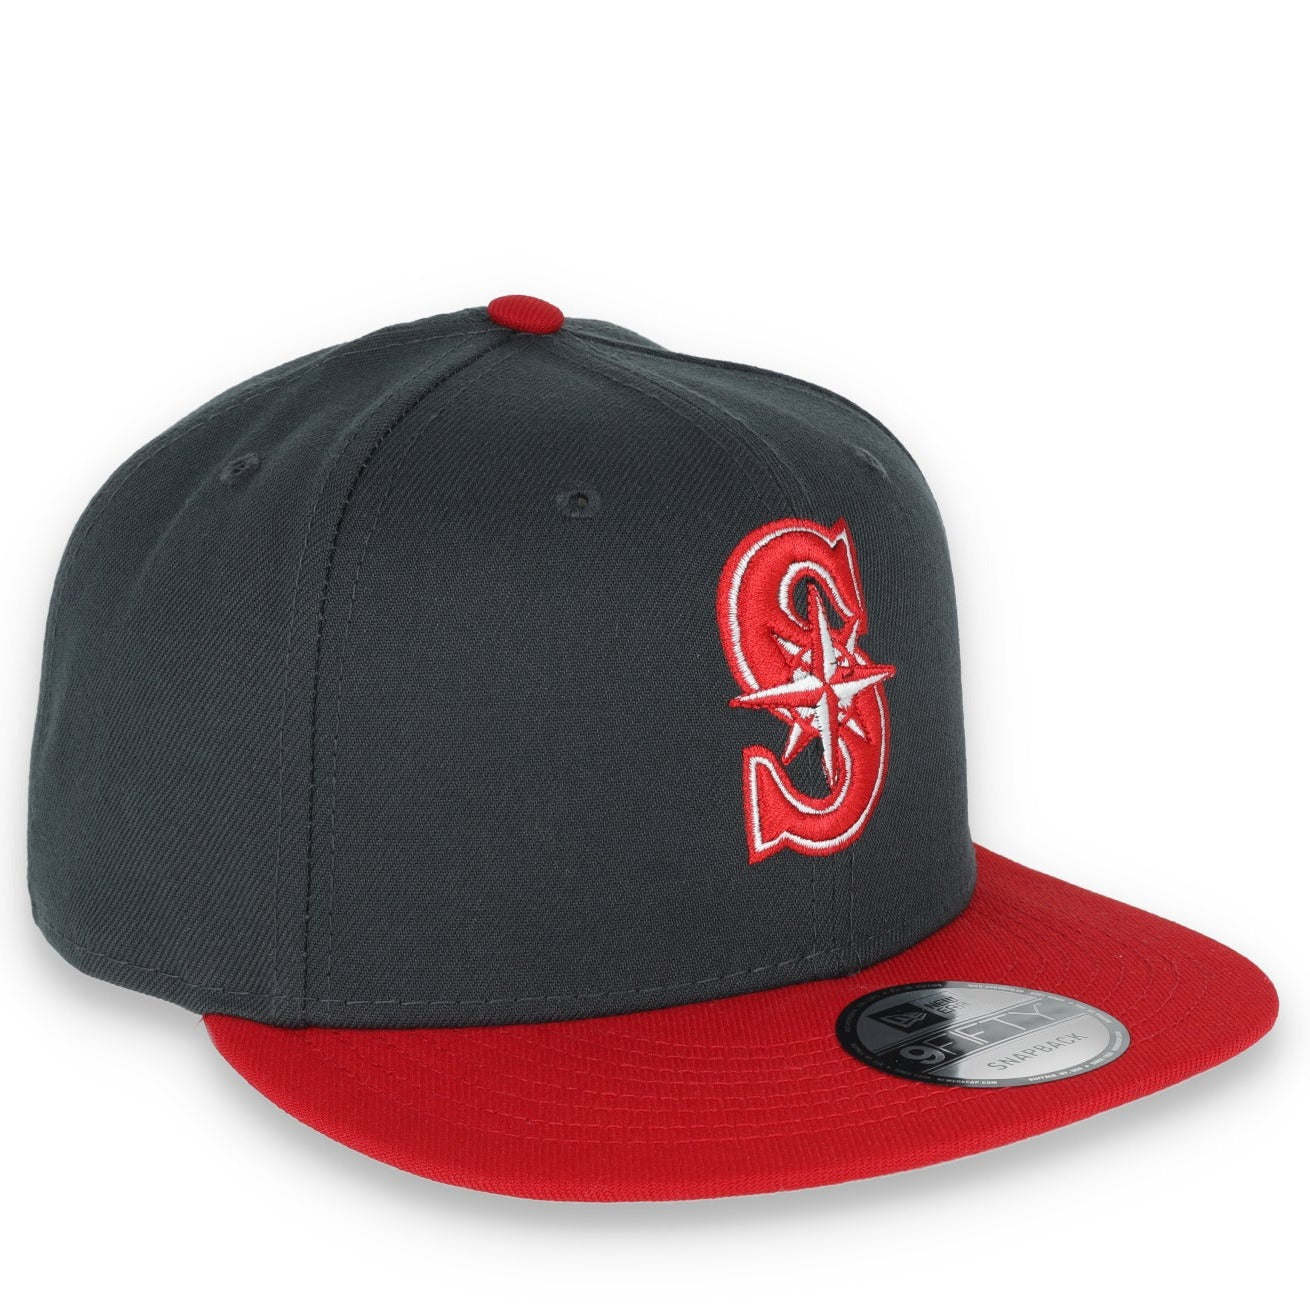 New Era Seattle Mariners 2-Tone Color Pack 9FIFTY Snapback Hat-Grey/Scarlet